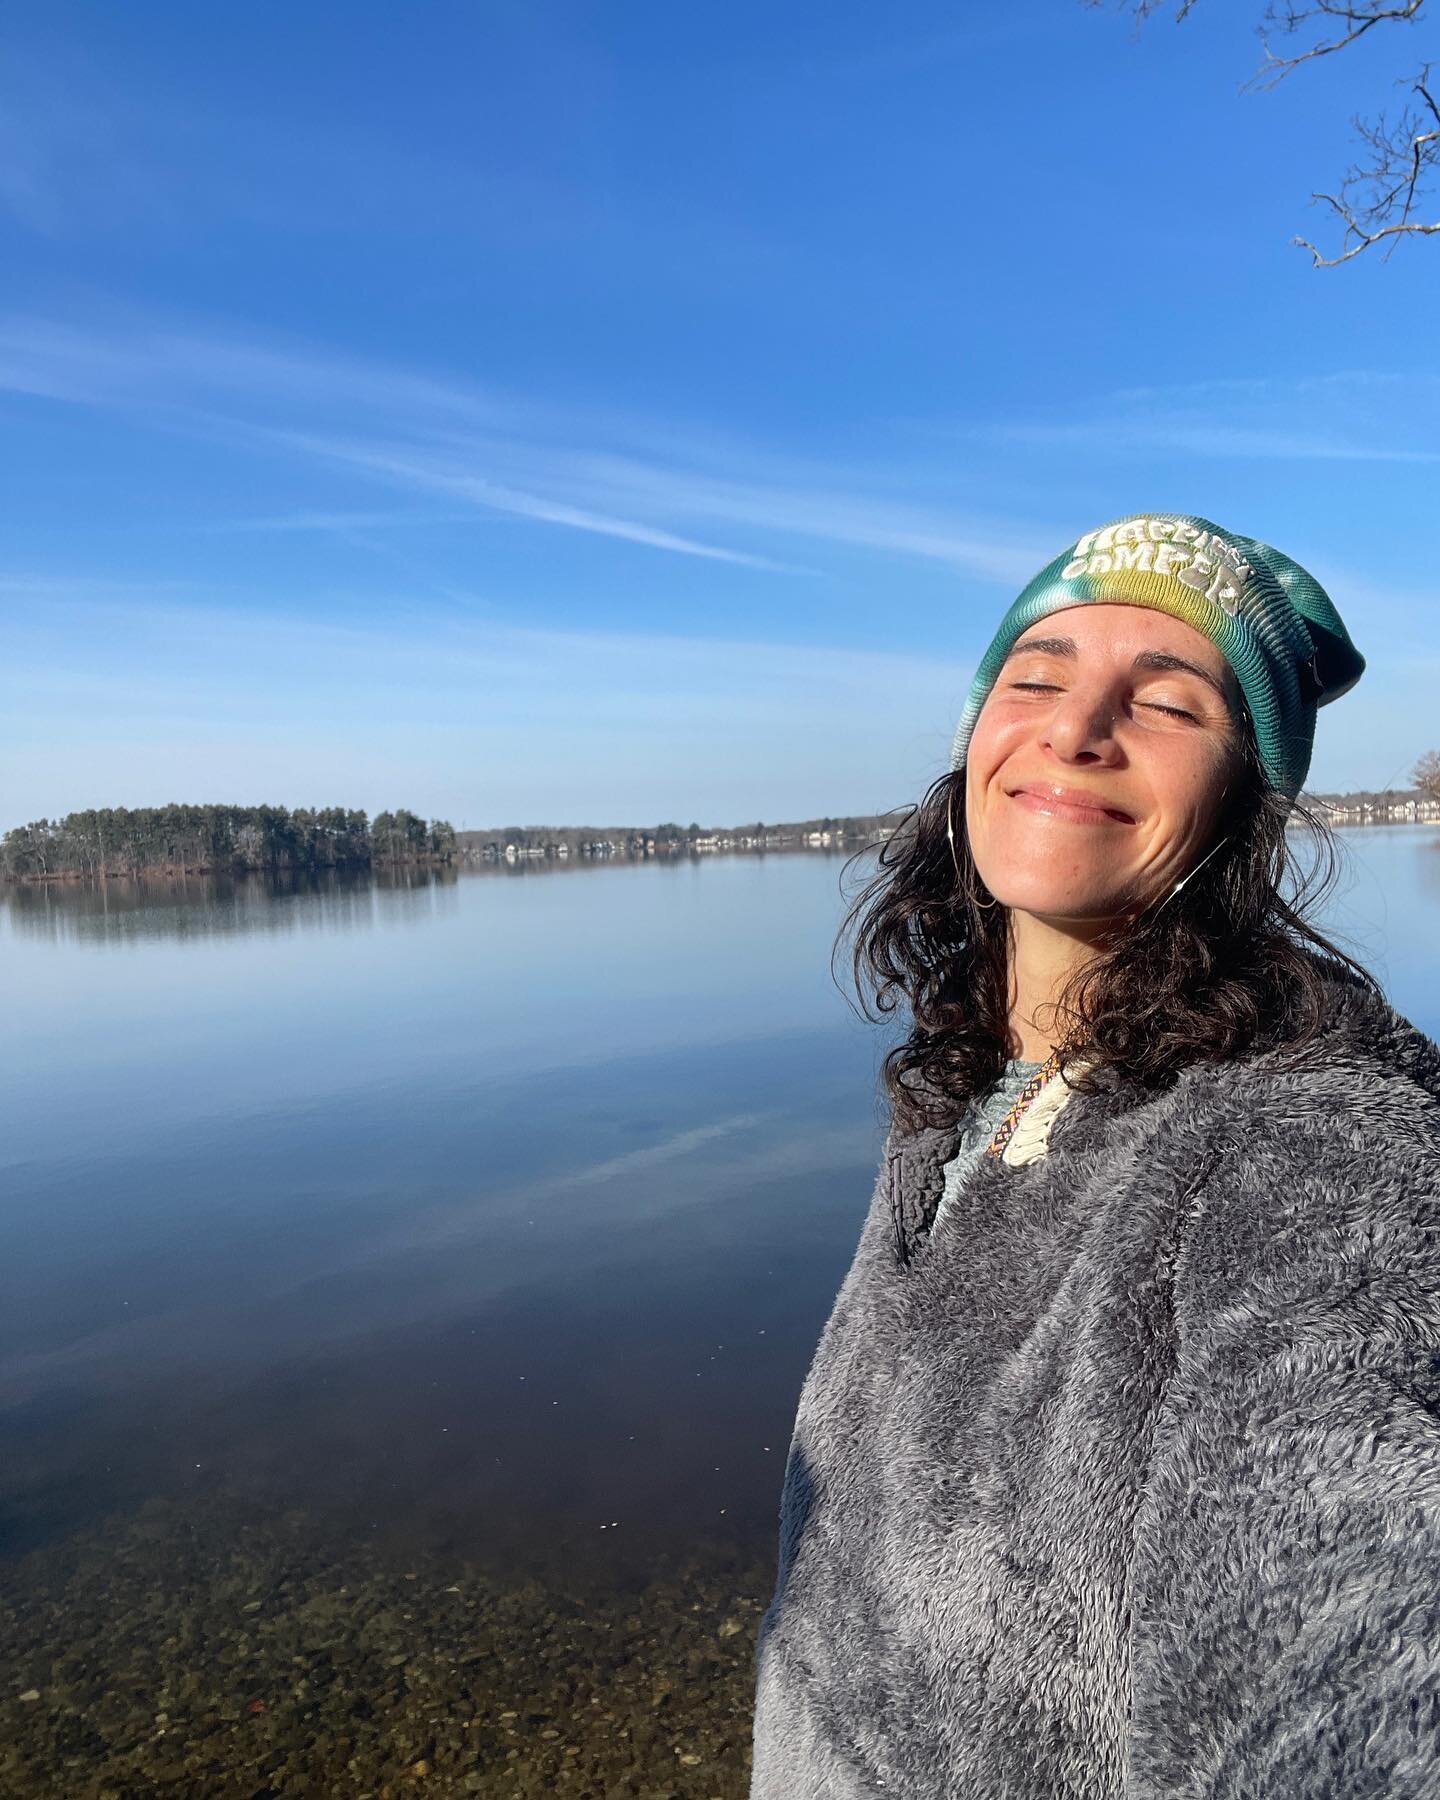 The environment is a powerful force that has quite an impact on our bodies. Connecting with nature taps us into our circadian rhythm and the hum that&rsquo;s all around us. While transitioning from a warm climate to a cold climate, I&rsquo;ve made it